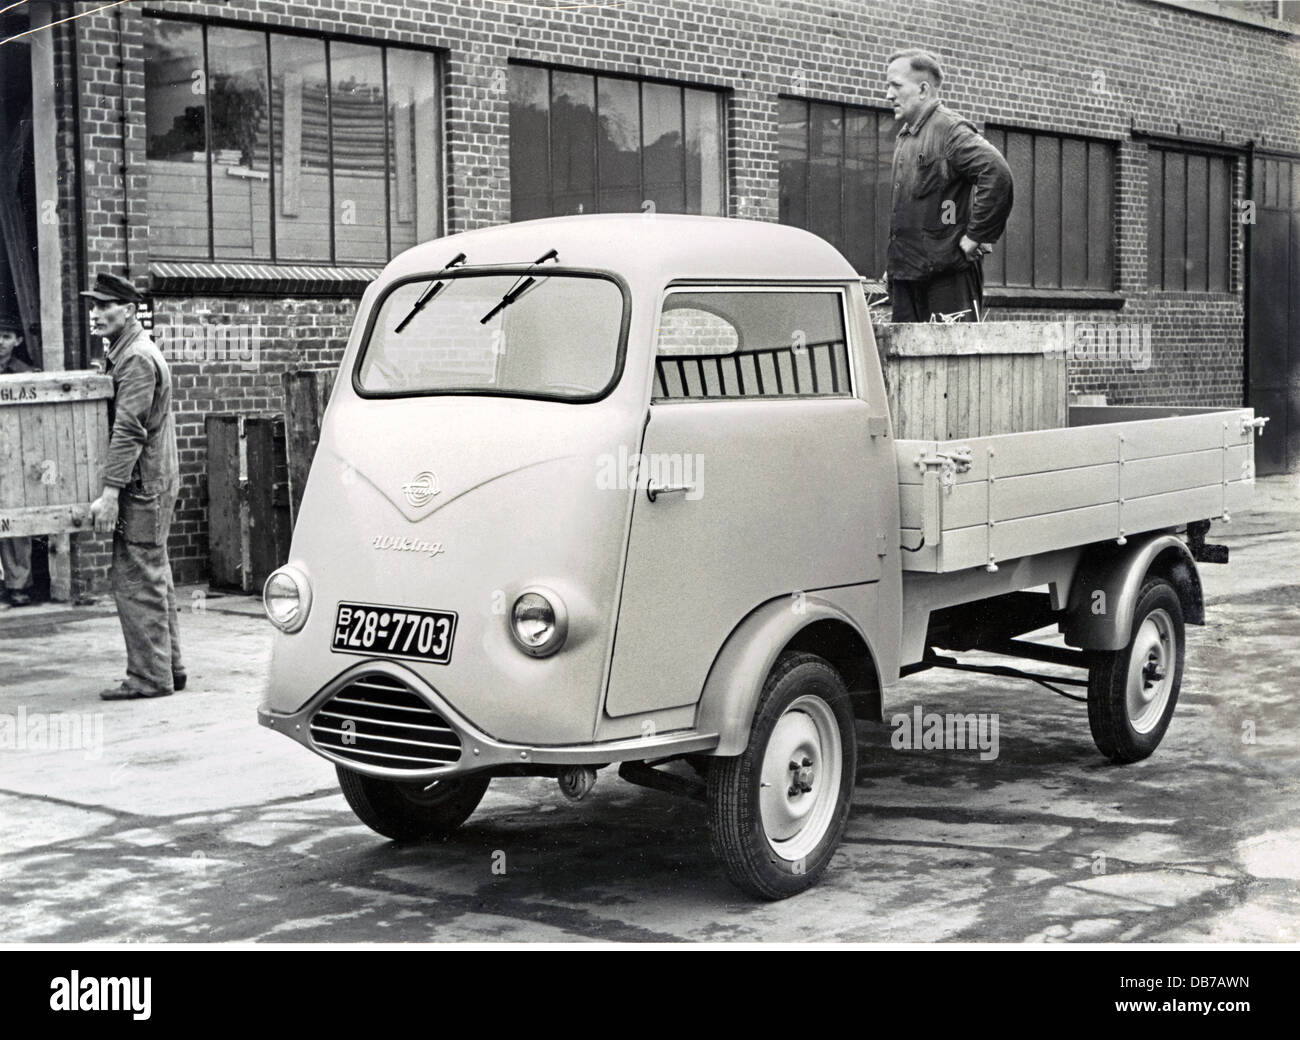 transport / transportation,car,vehicle variants,Tempo Wiking,pickup truck,load area,2 cylinder two-stroke engine,made by Vidal & Sohn Tempo plant in Hamburg-Harburg,the Wiking was produced from 1953-55,workers loading boxes,image by manufacturer,Germany,1953,two-stroke,small lorry,carriage,transporter,transporters,light delivery truck,delivery vans,light delivery trucks,delivering,deliver,utility vehicle,commercial vehicle,utility vehicles,commercial vehicles,car advertising,federal republic,economic miracle,economic miracles,Made,Additional-Rights-Clearences-Not Available Stock Photo